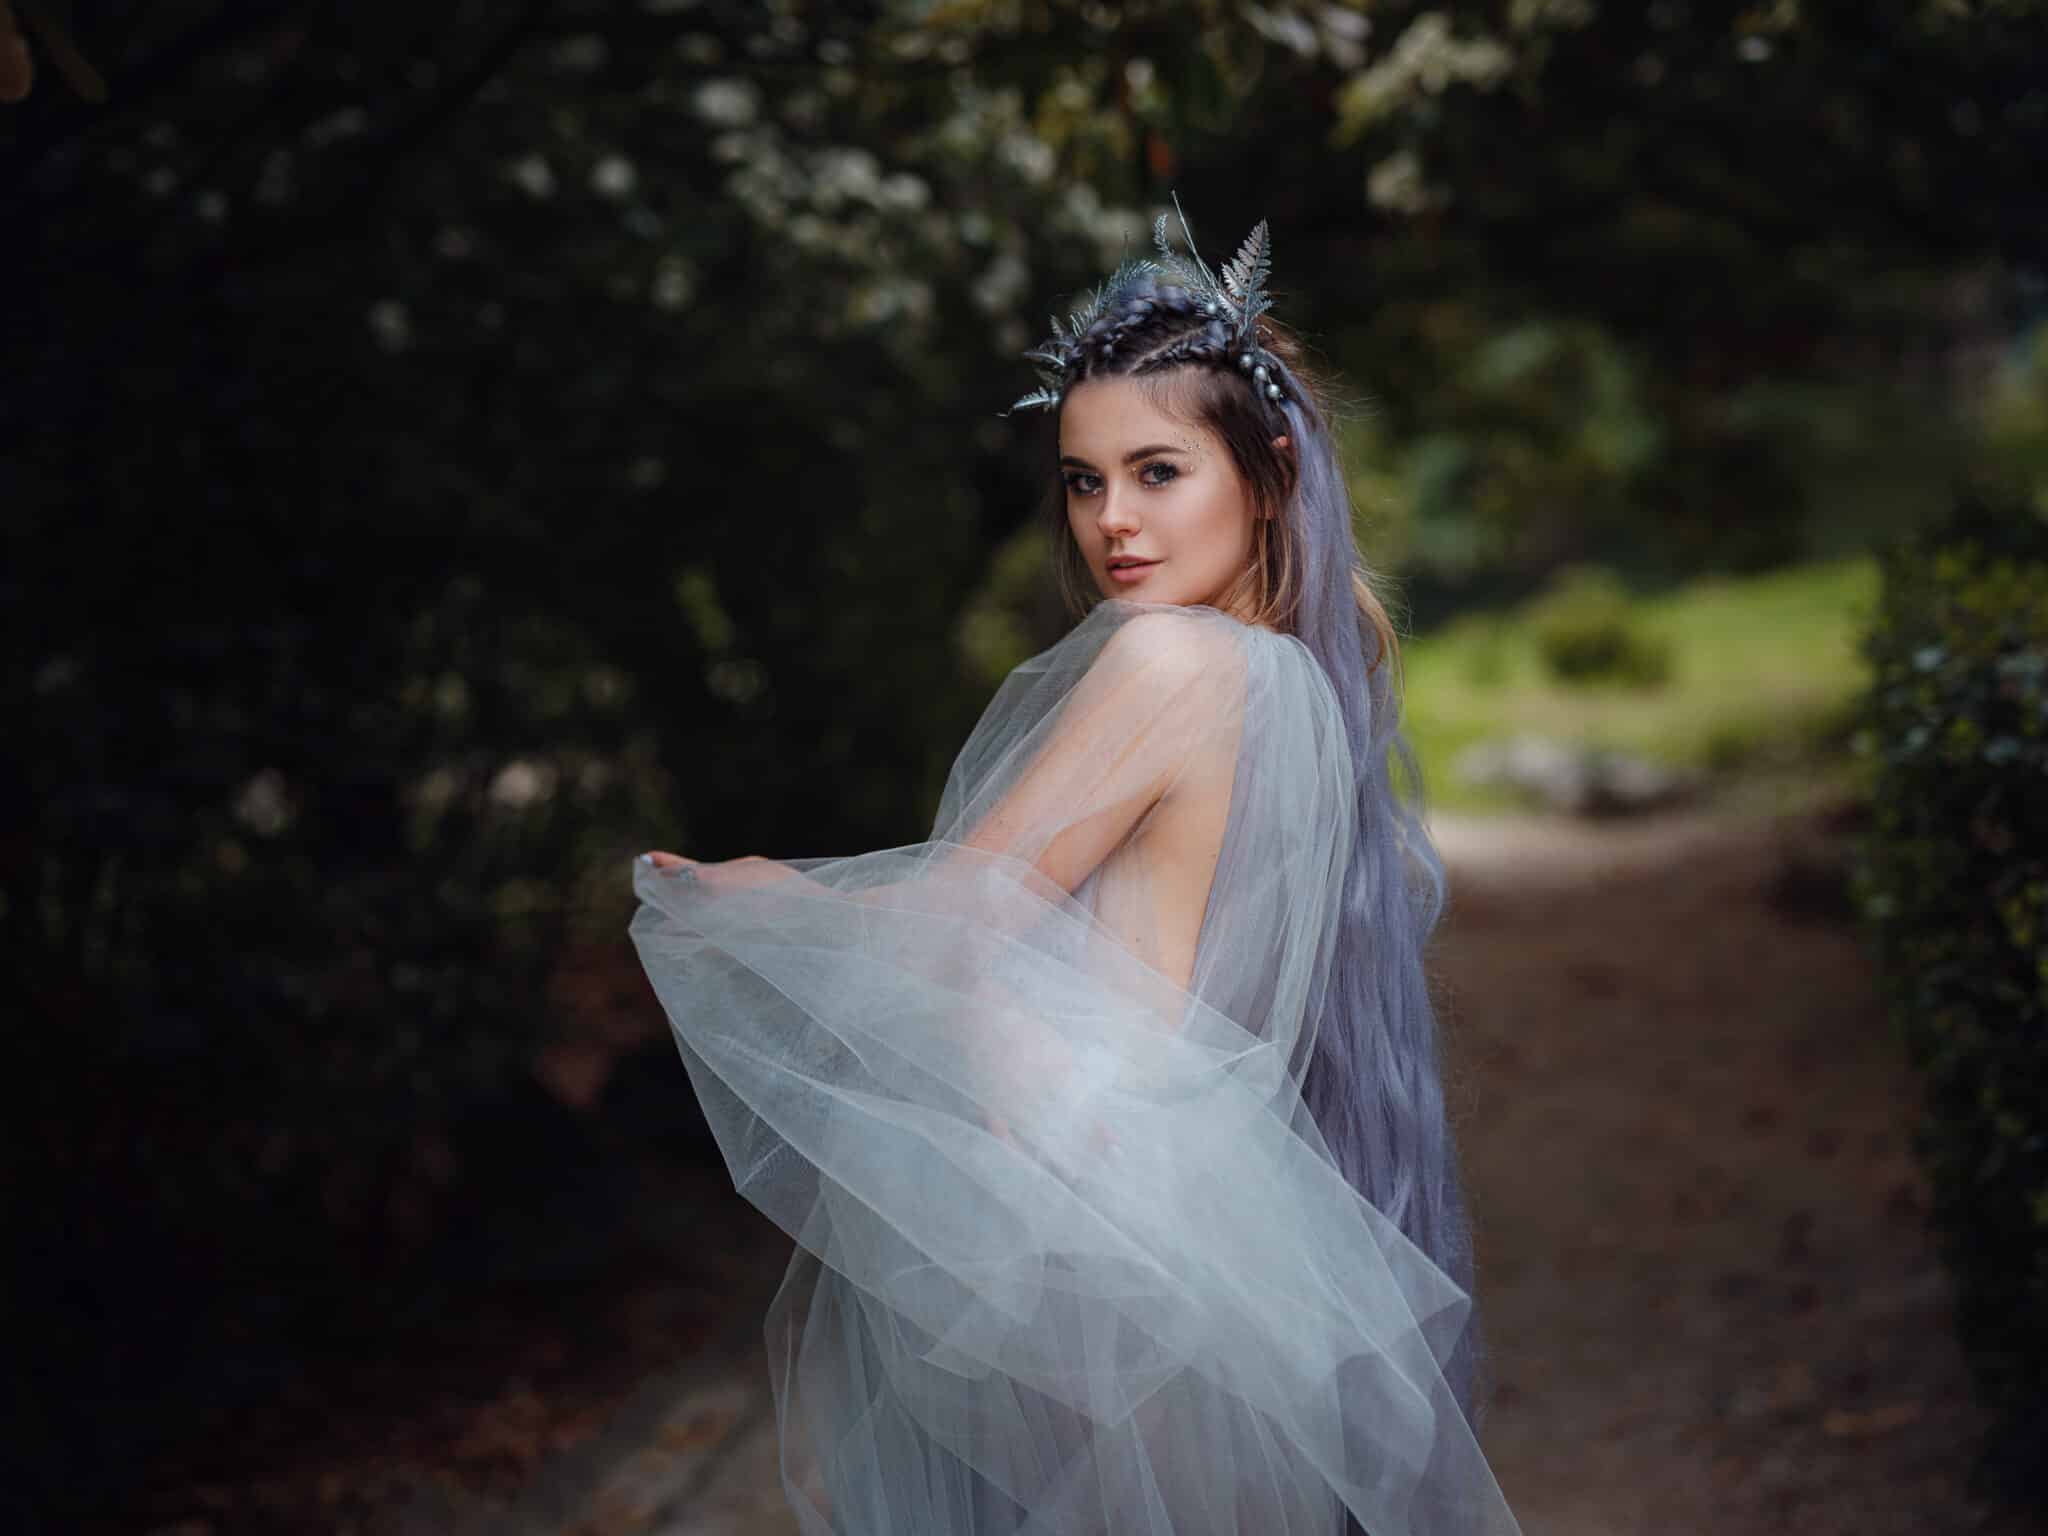 a beautiful princess nymph walking in the woods